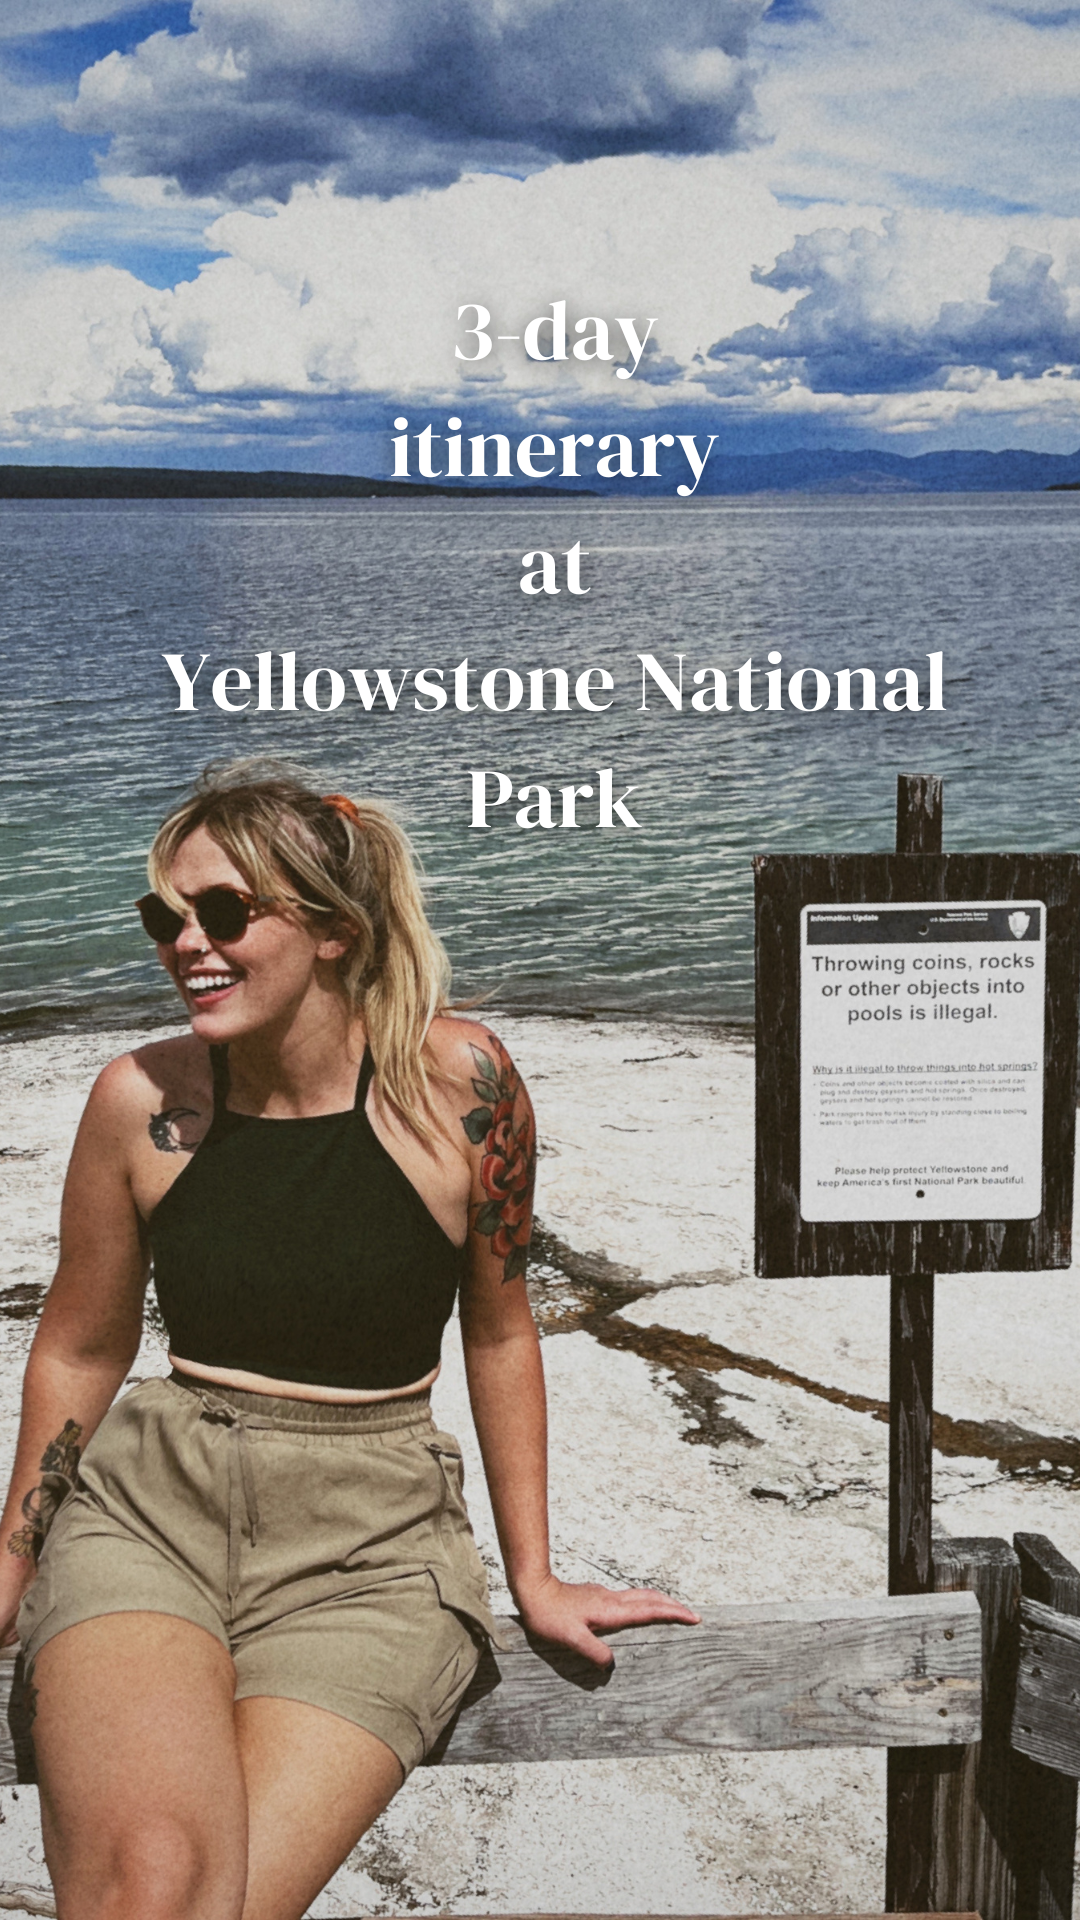 Excited traveler taking in the stunning view of Yellowstone Lake in Yellowstone National Park